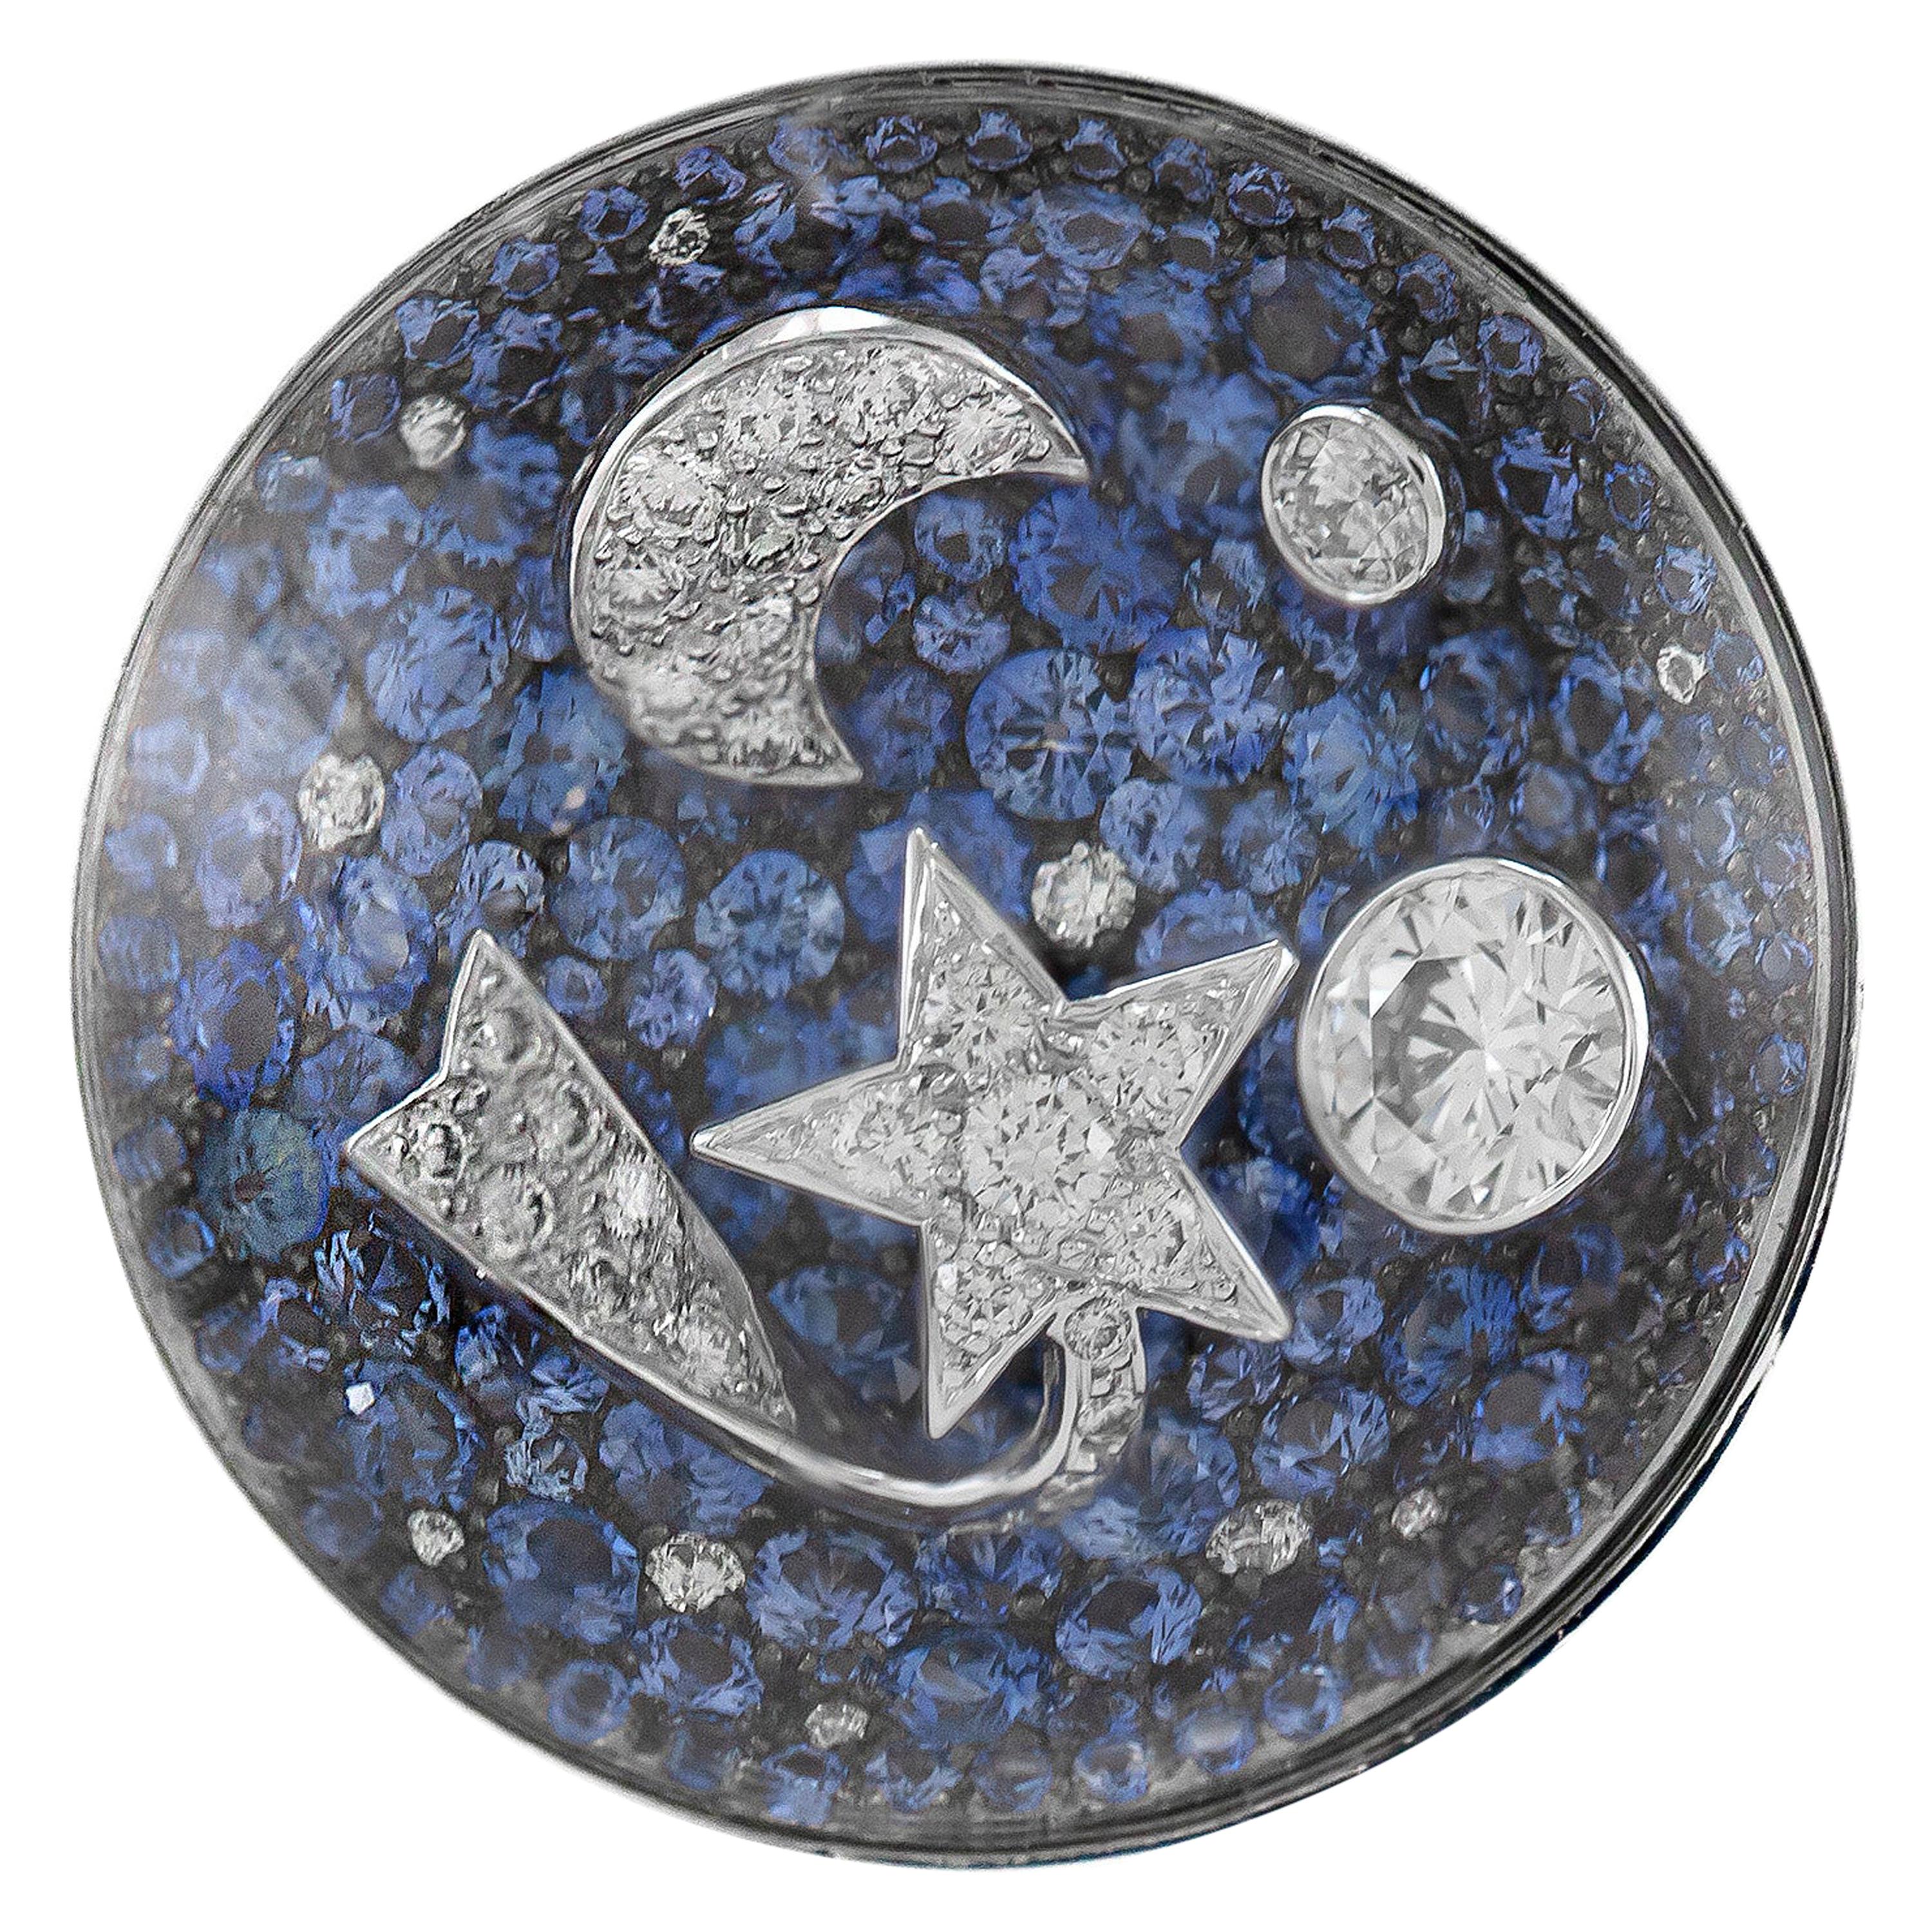 The 2011 diamond and sapphire Bulle de Ciel ring, offered by Eric Originals and Antiques LTD, depicting a starry night sky